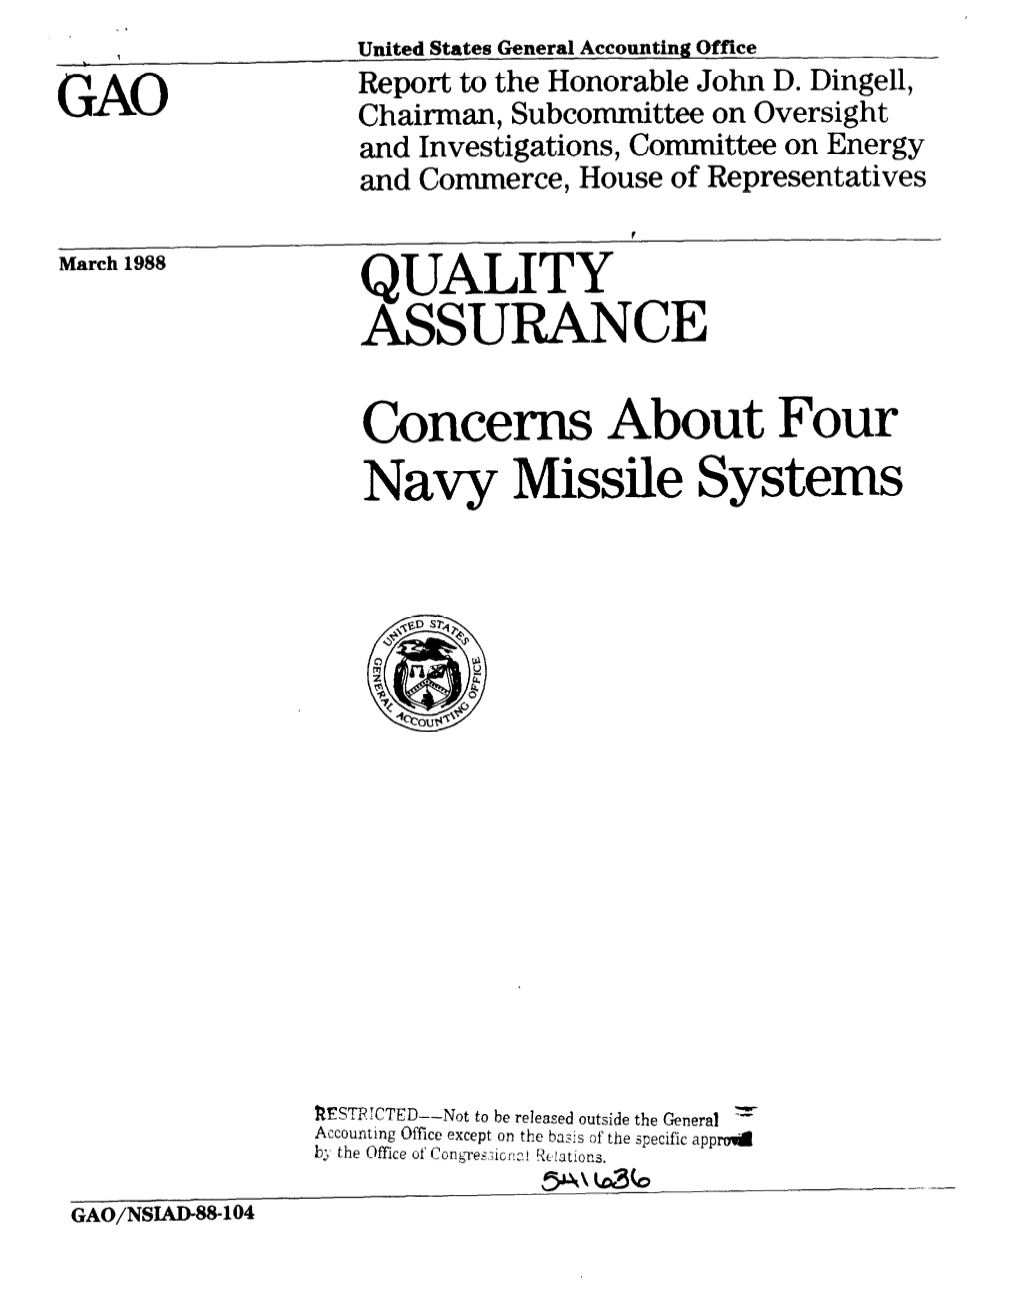 NSIAD-88-104 Quality Assurance: Concerns About Four Navy Missile